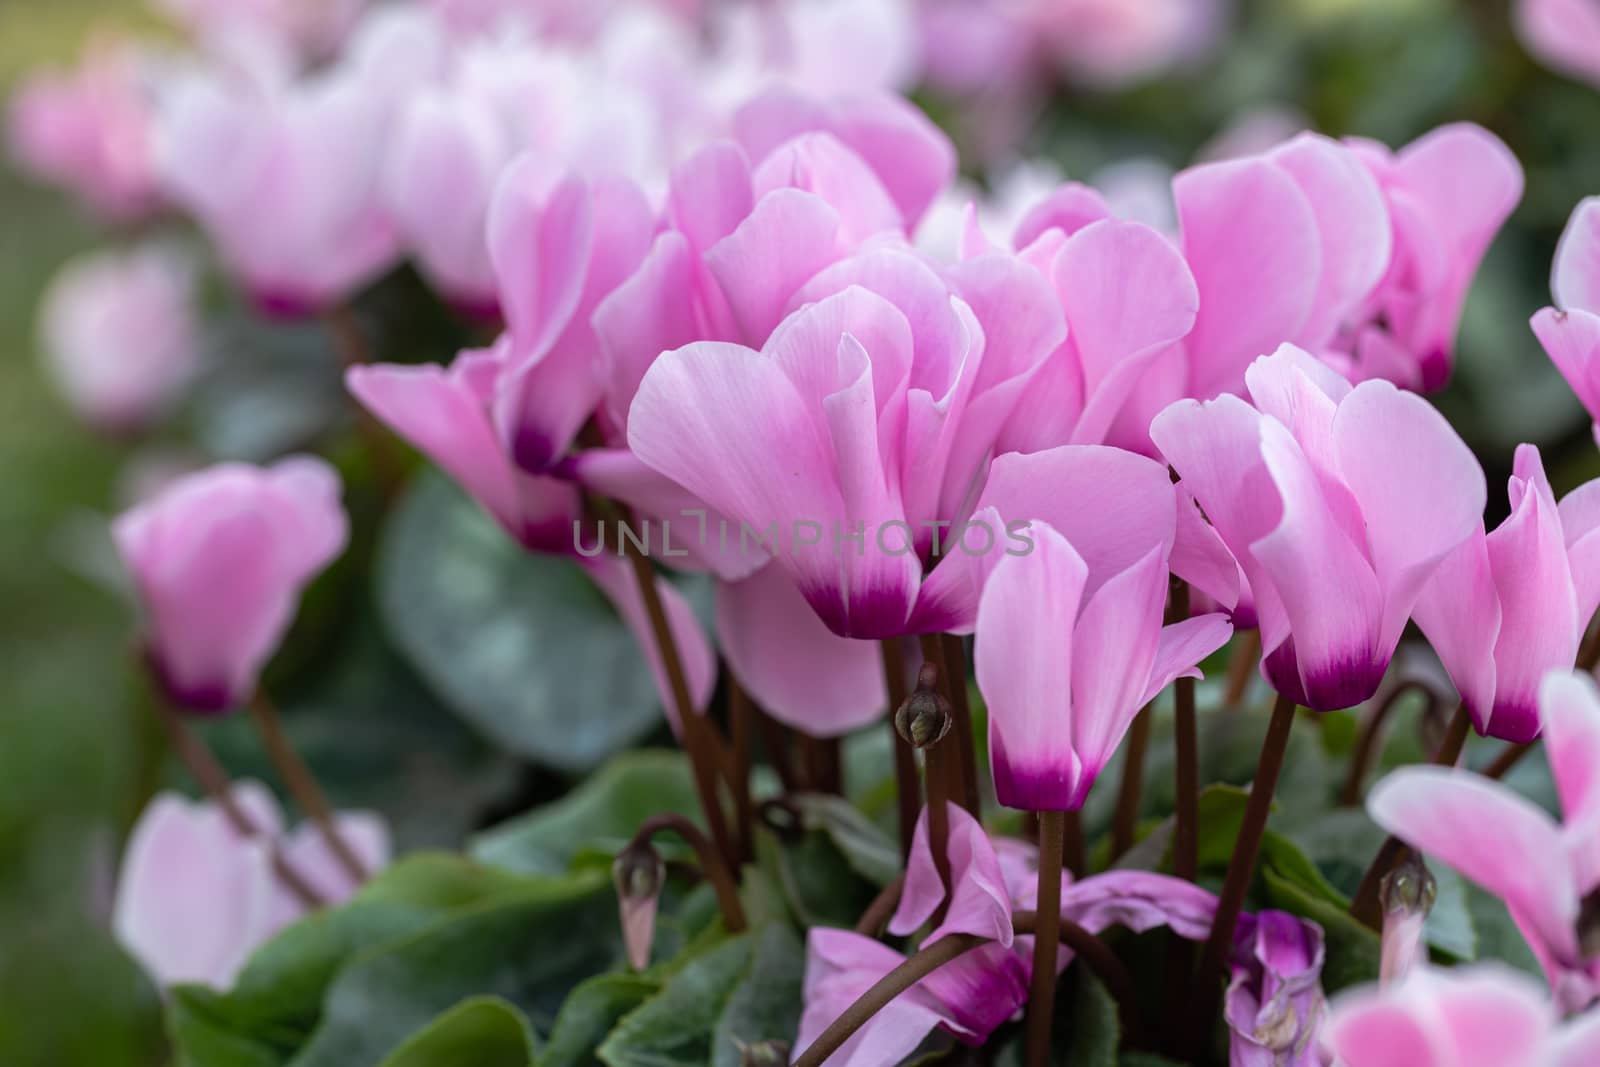 Cyclamen flower in garden at sunny summer or spring day by phanthit